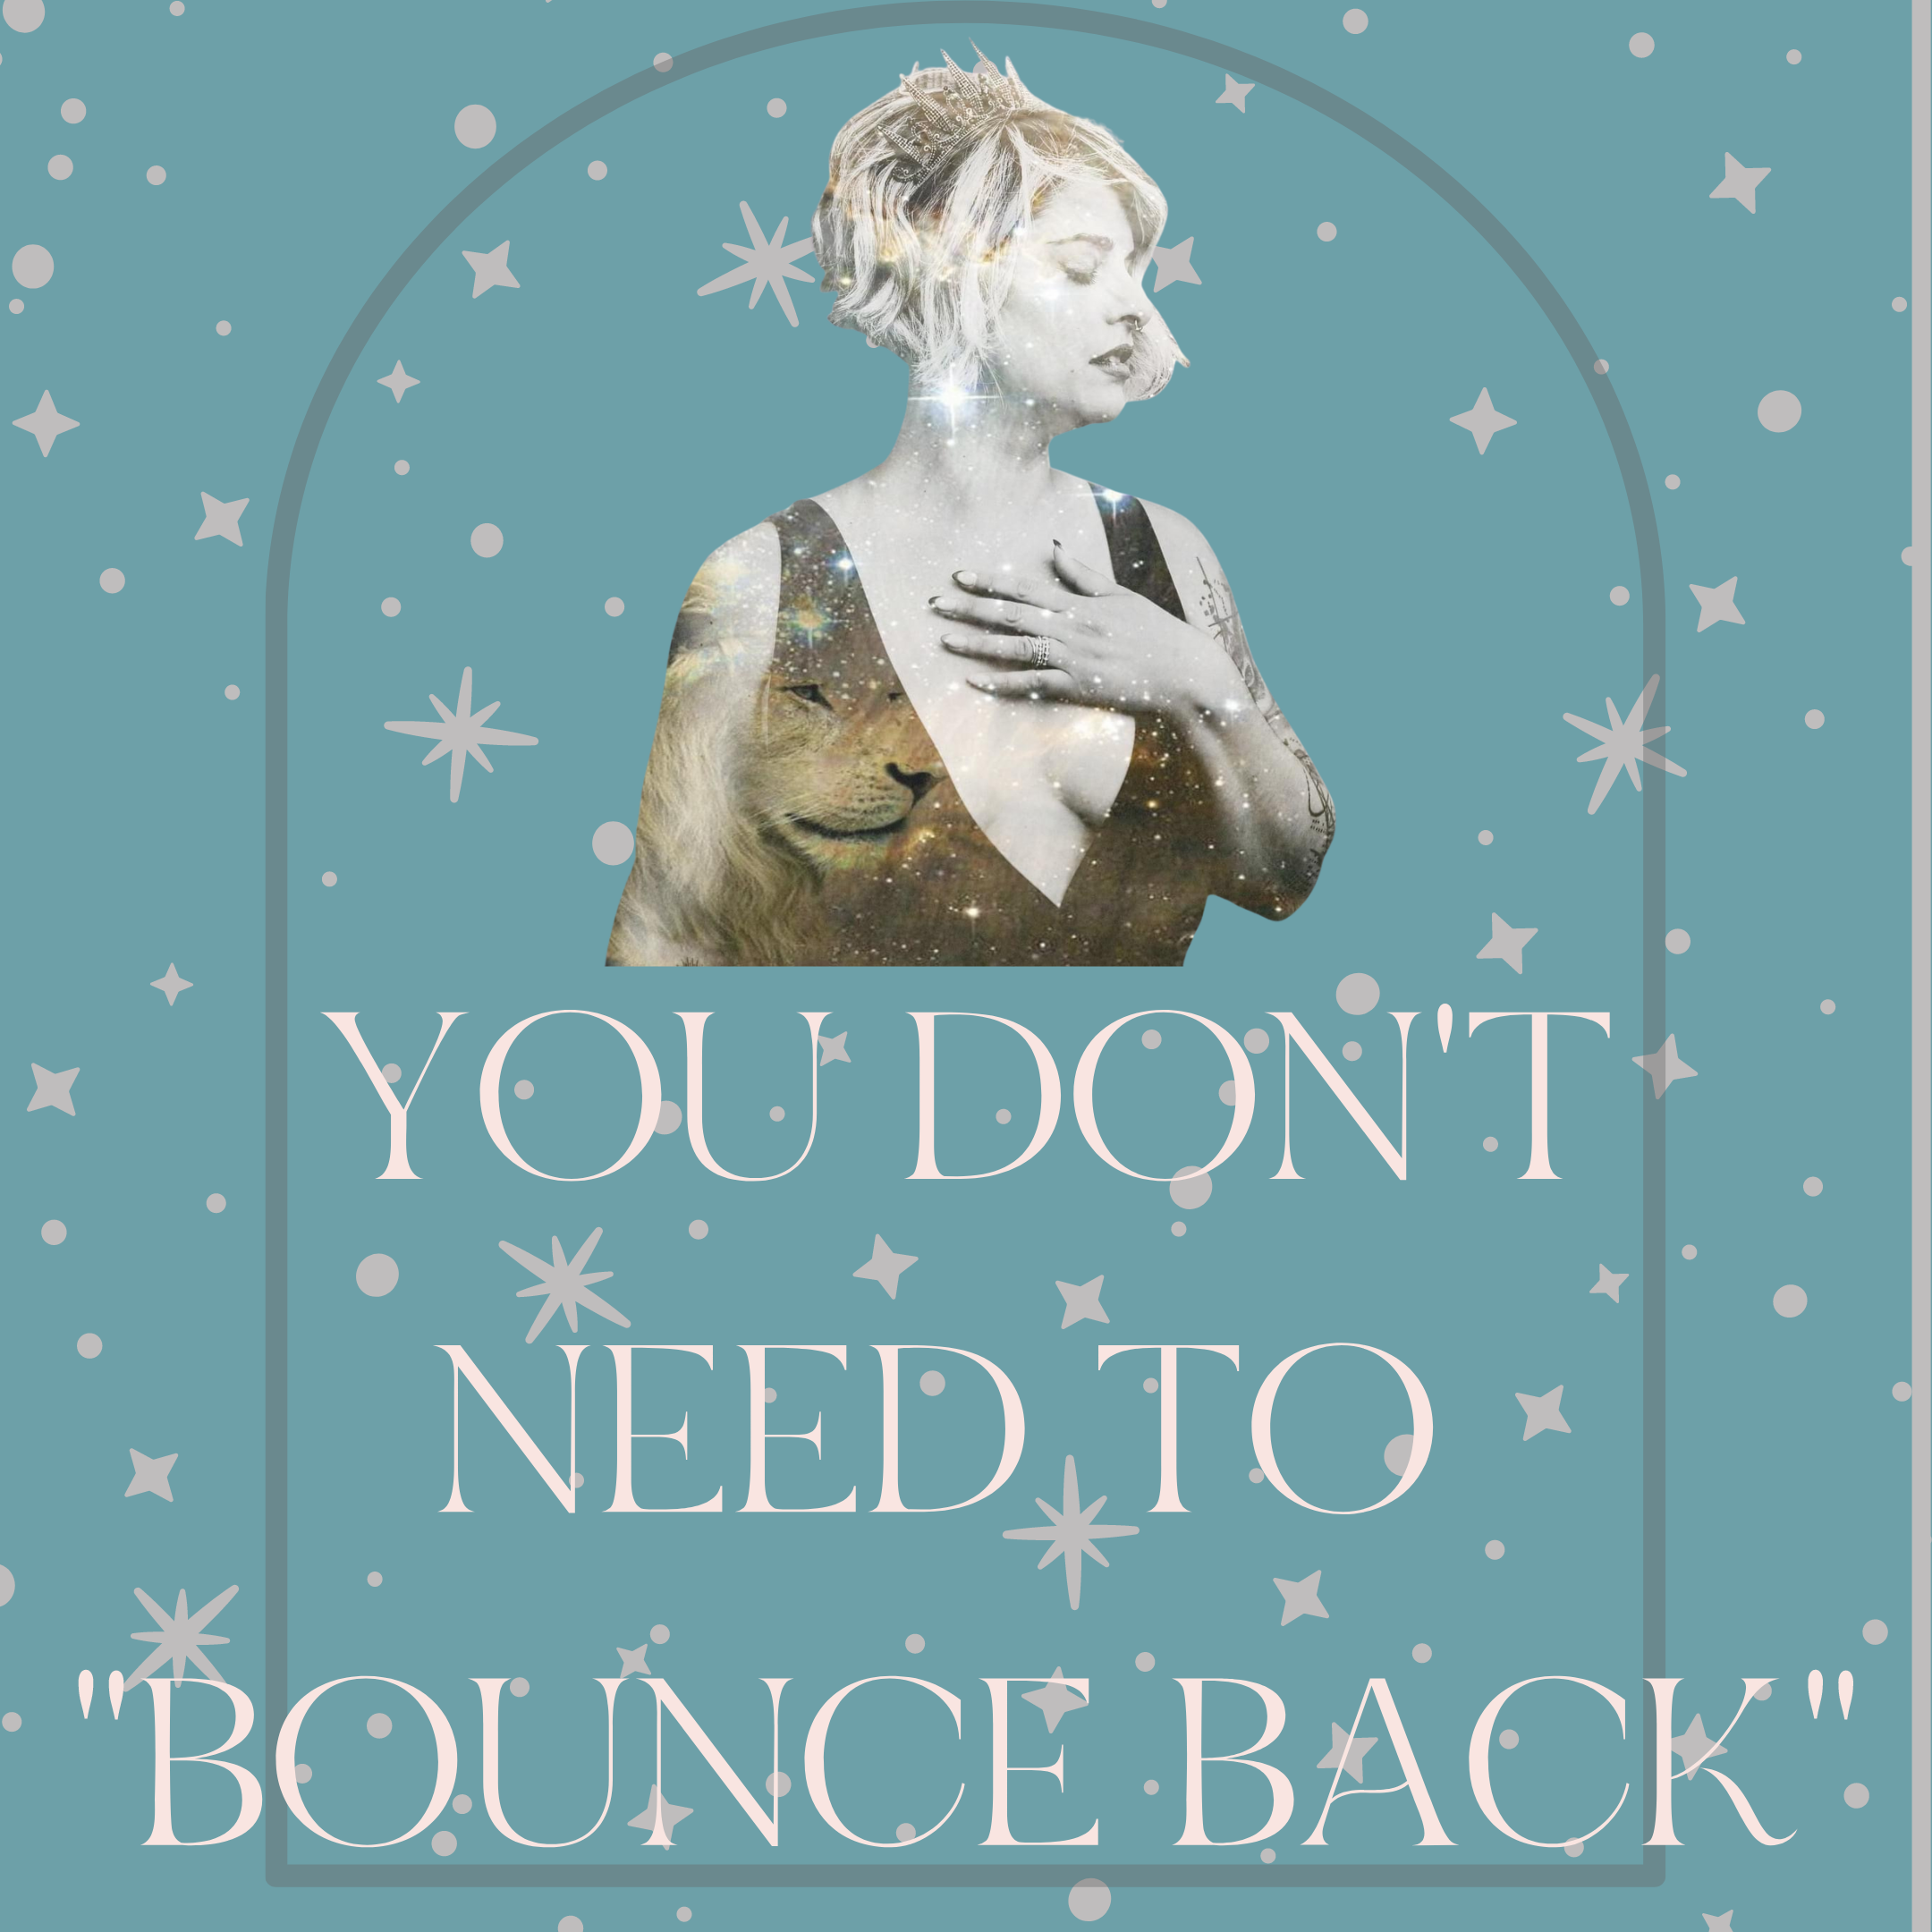 You don't need to "bounce back"